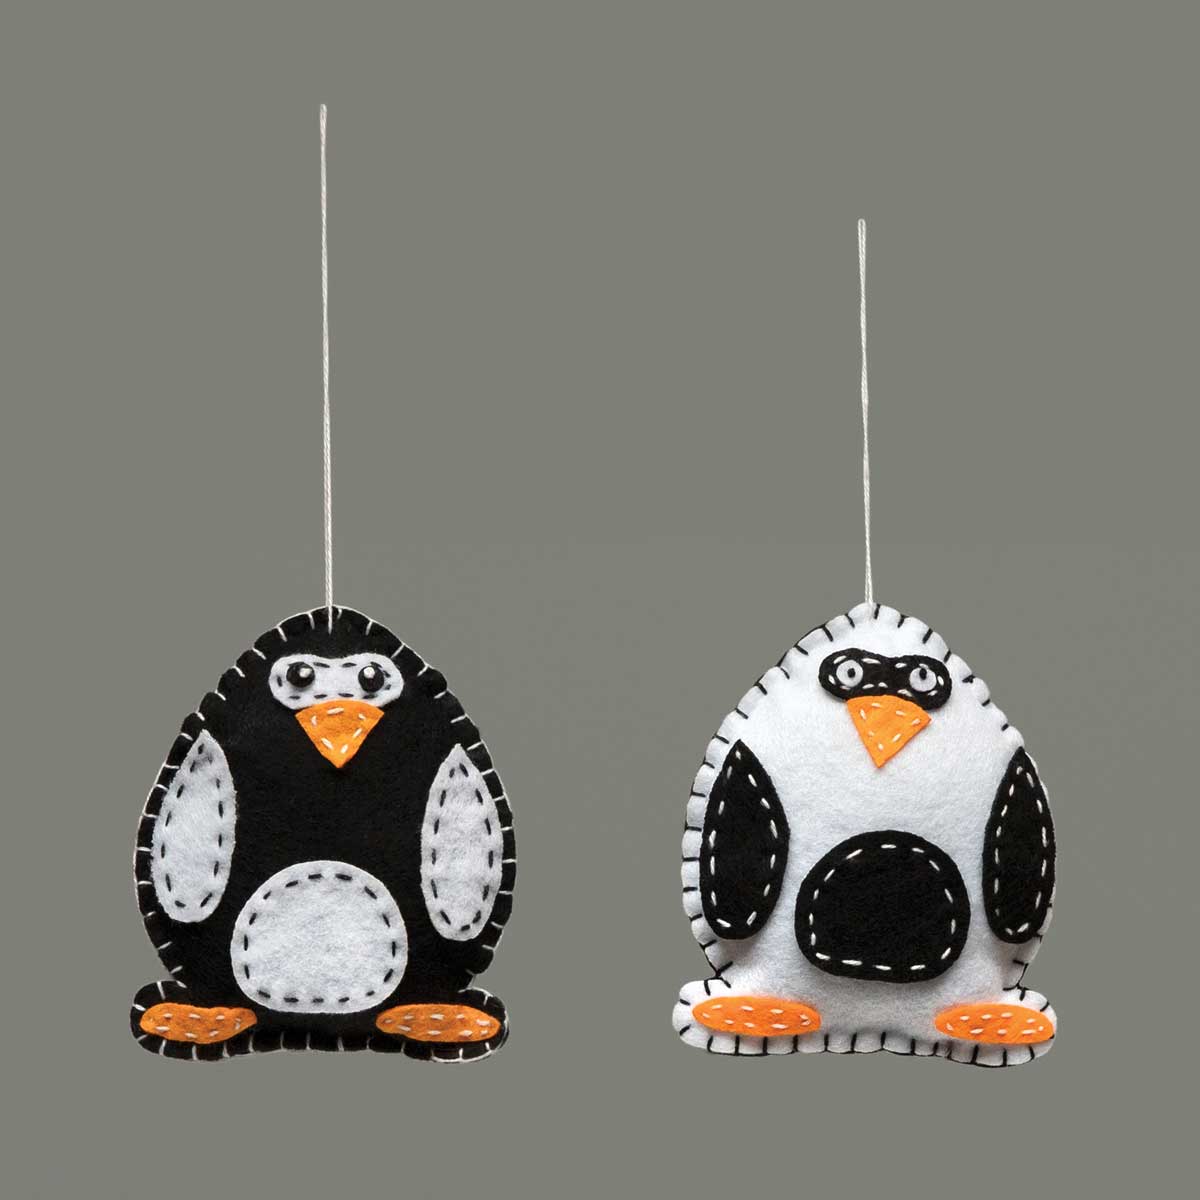 ORNAMENT PENGUIN 2 ASSORTED 3IN X 1.25IN X 3.5IN - Click Image to Close